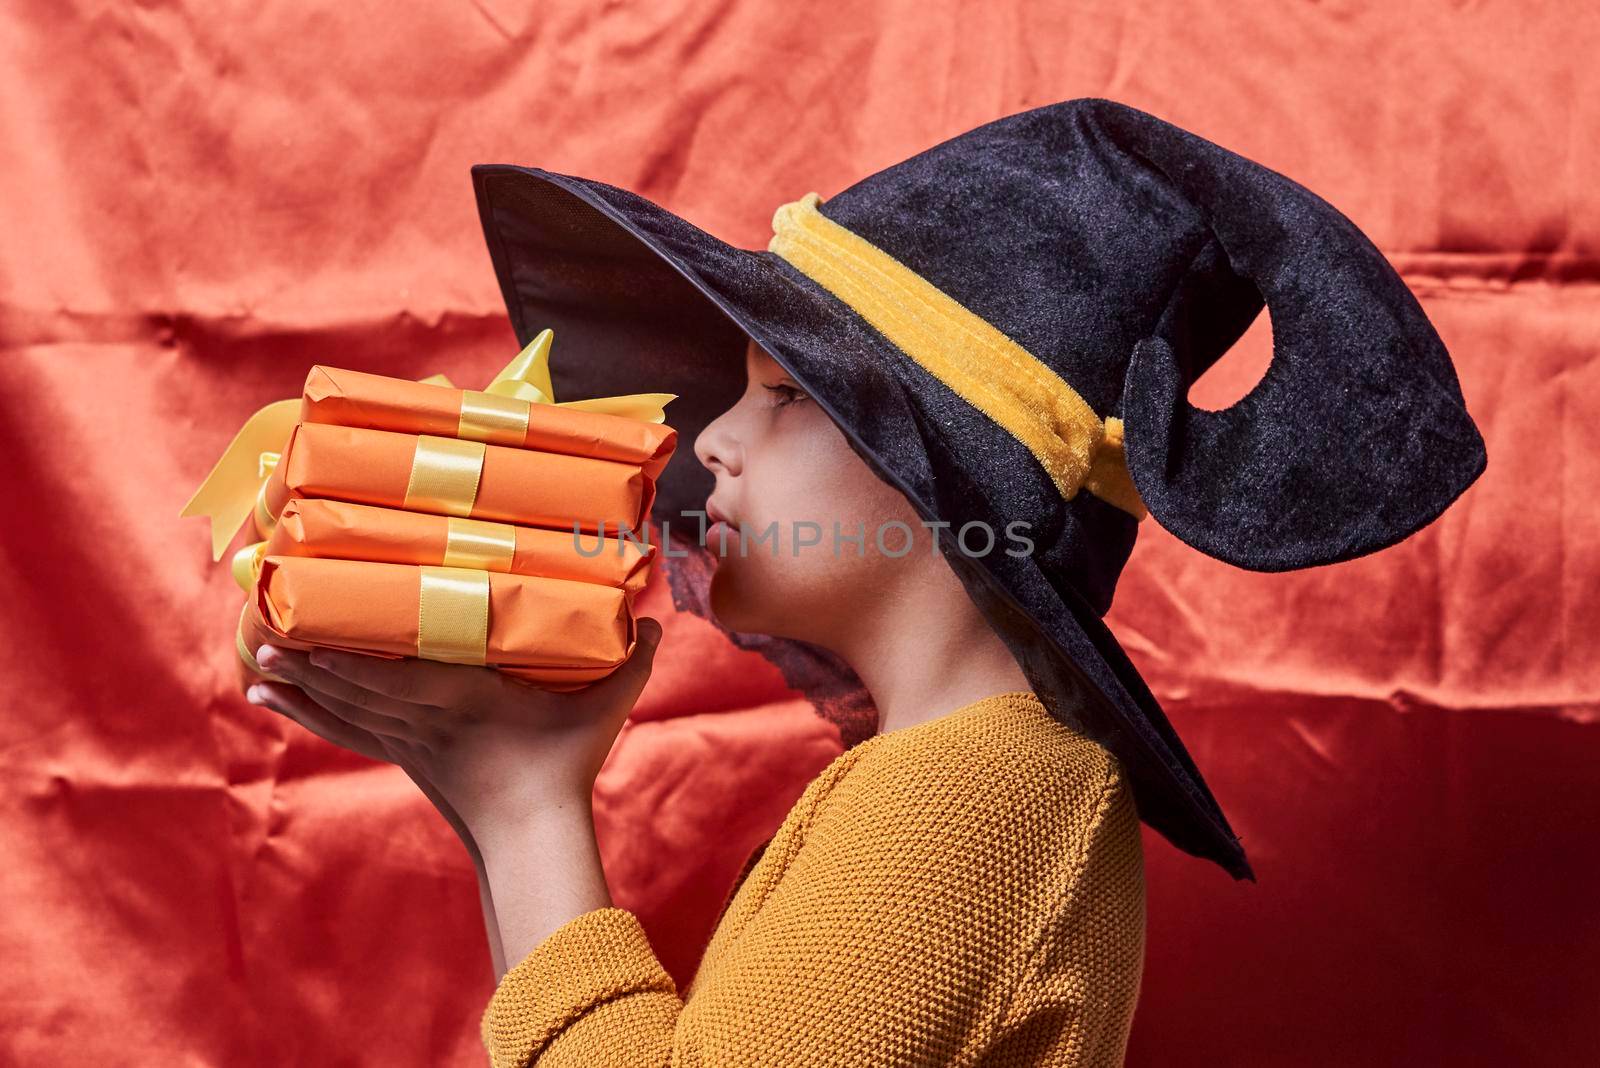 Halloween gifts in hands of a boy by golibtolibov